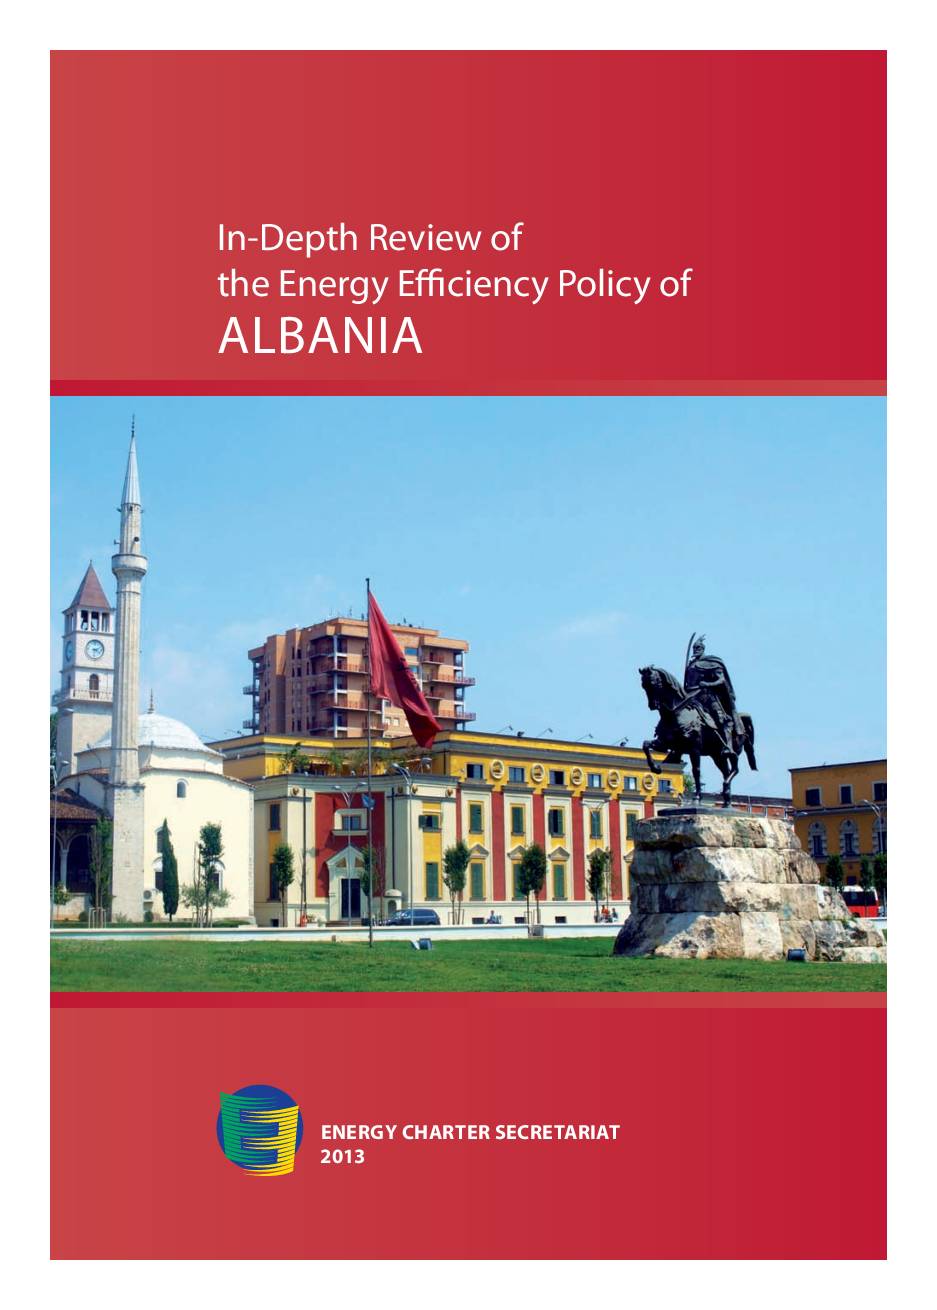 In-Depth Review of Energy Efficiency Policy of Albania